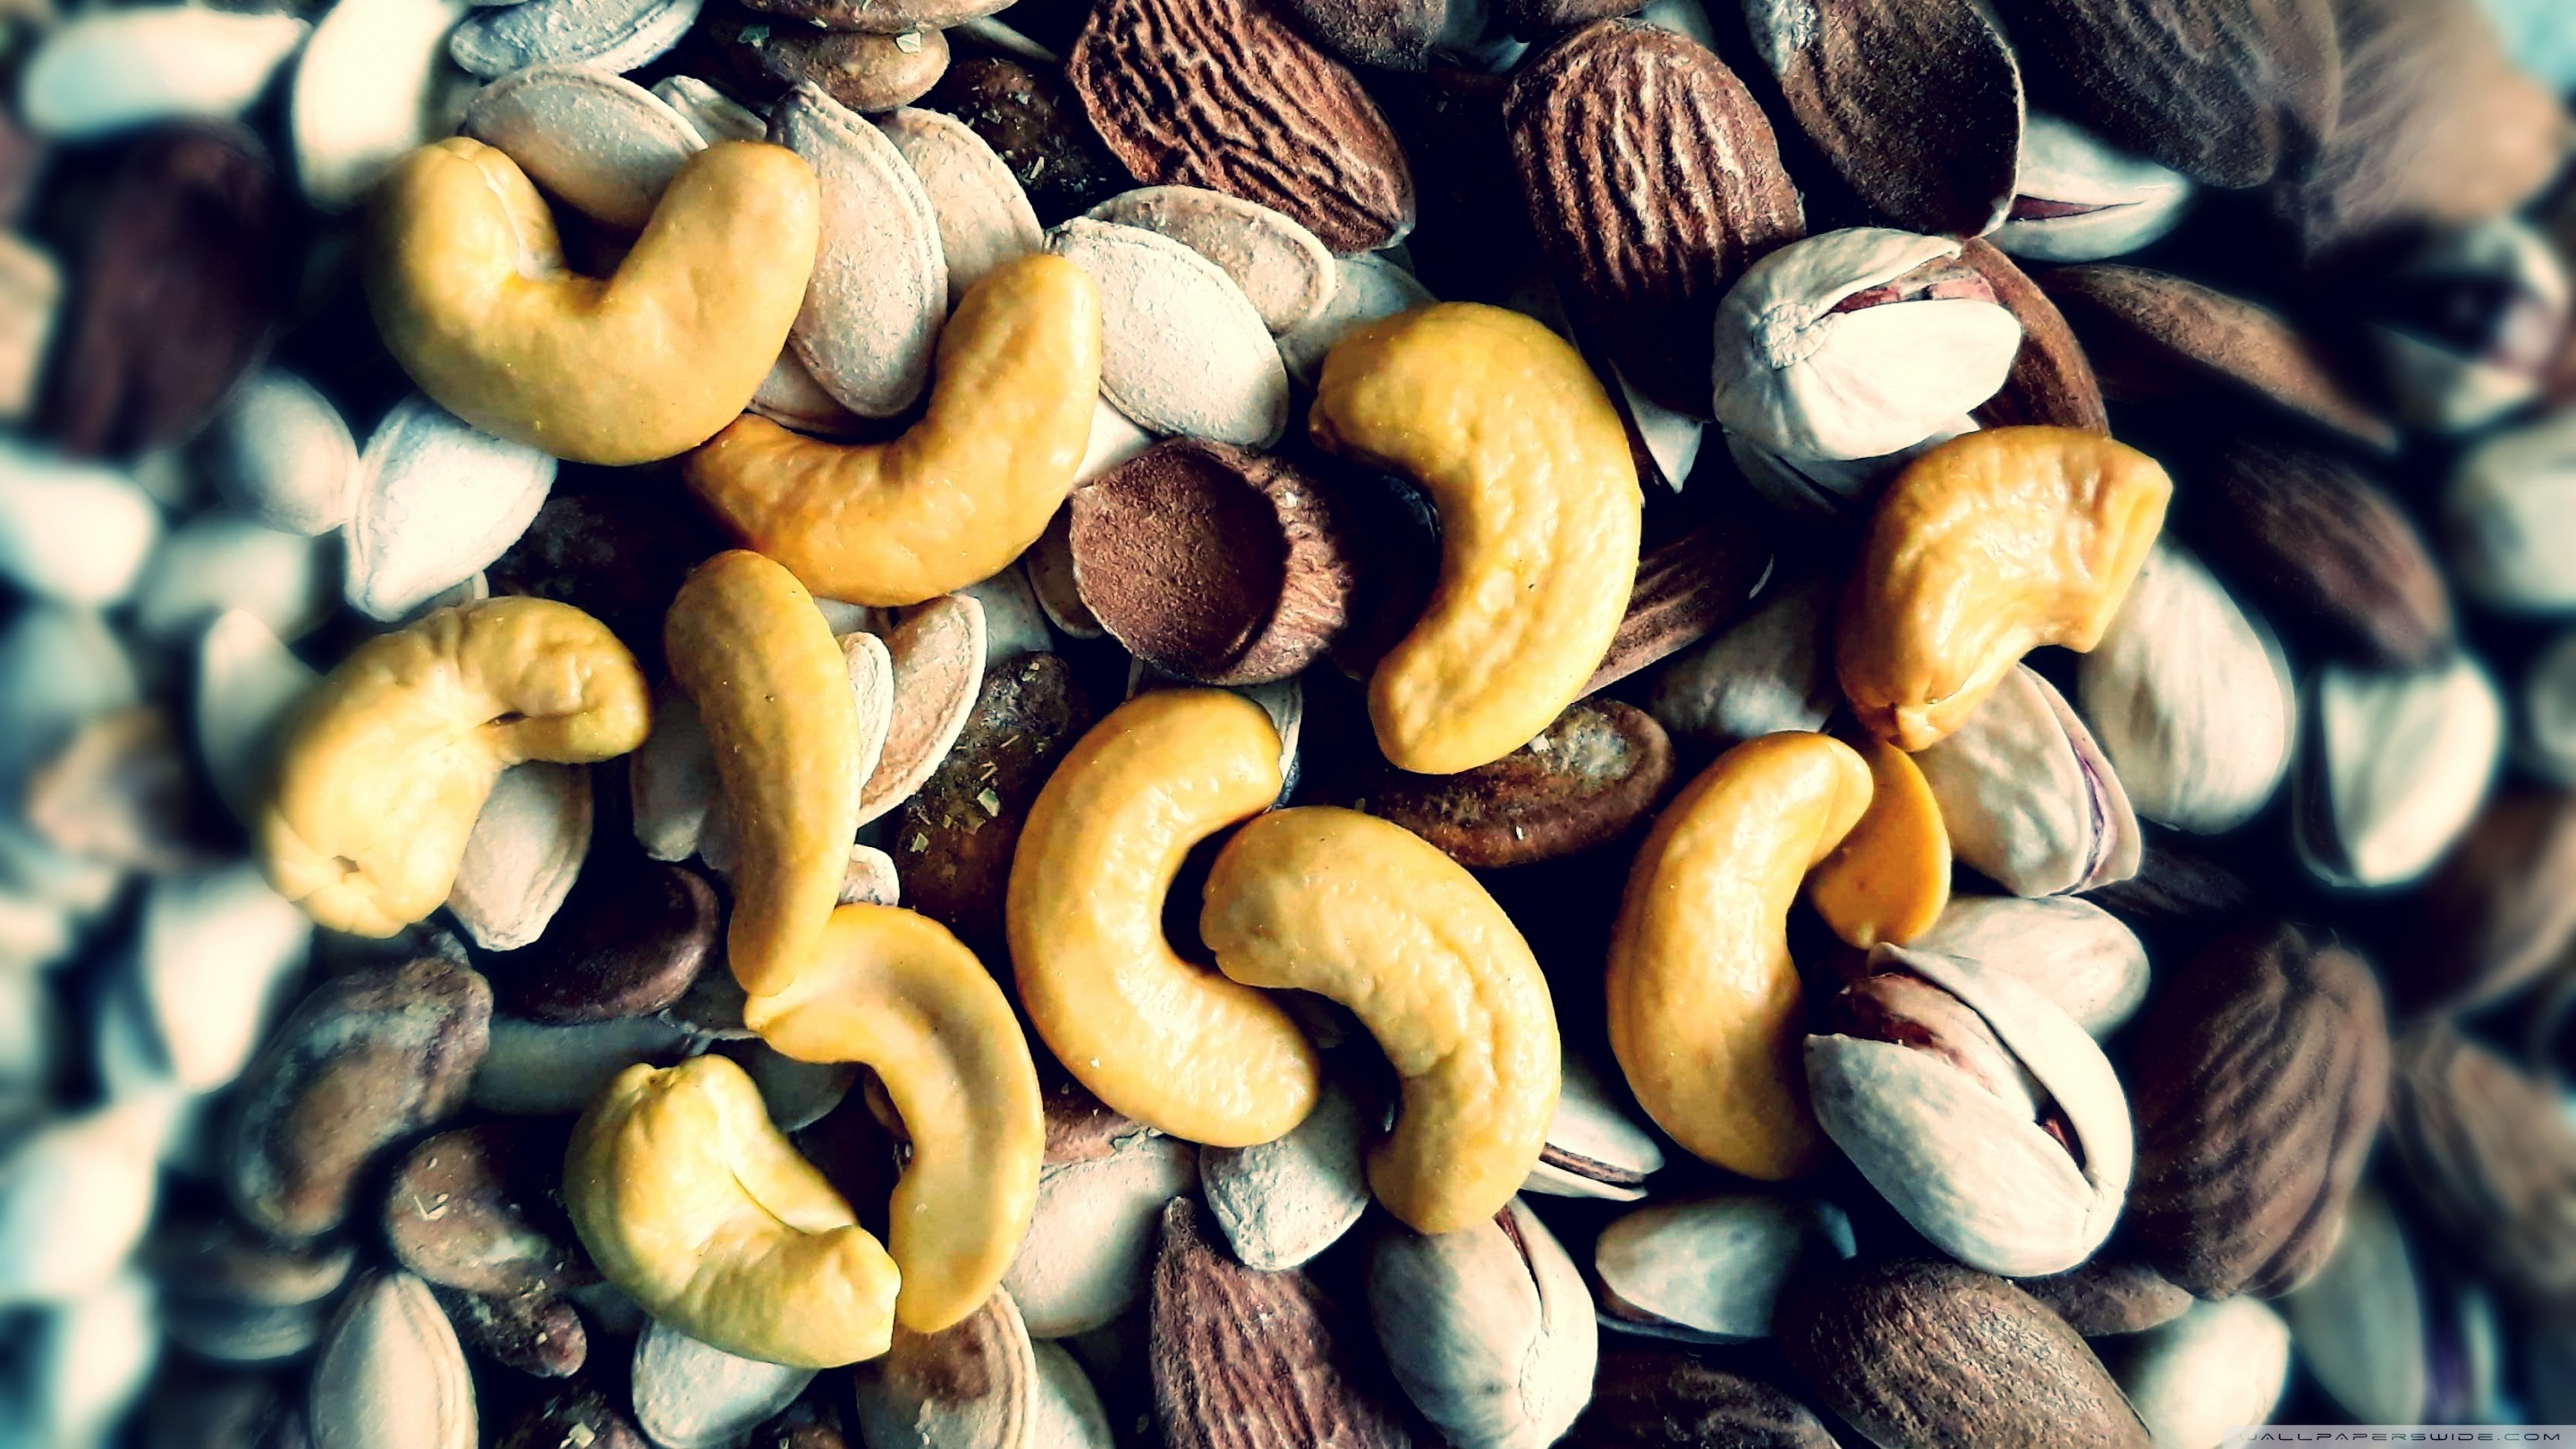 Cashew Nuts: Nuts, Fruits consisting of a hard or tough shell around an edible kernel. 2880x1620 HD Background.